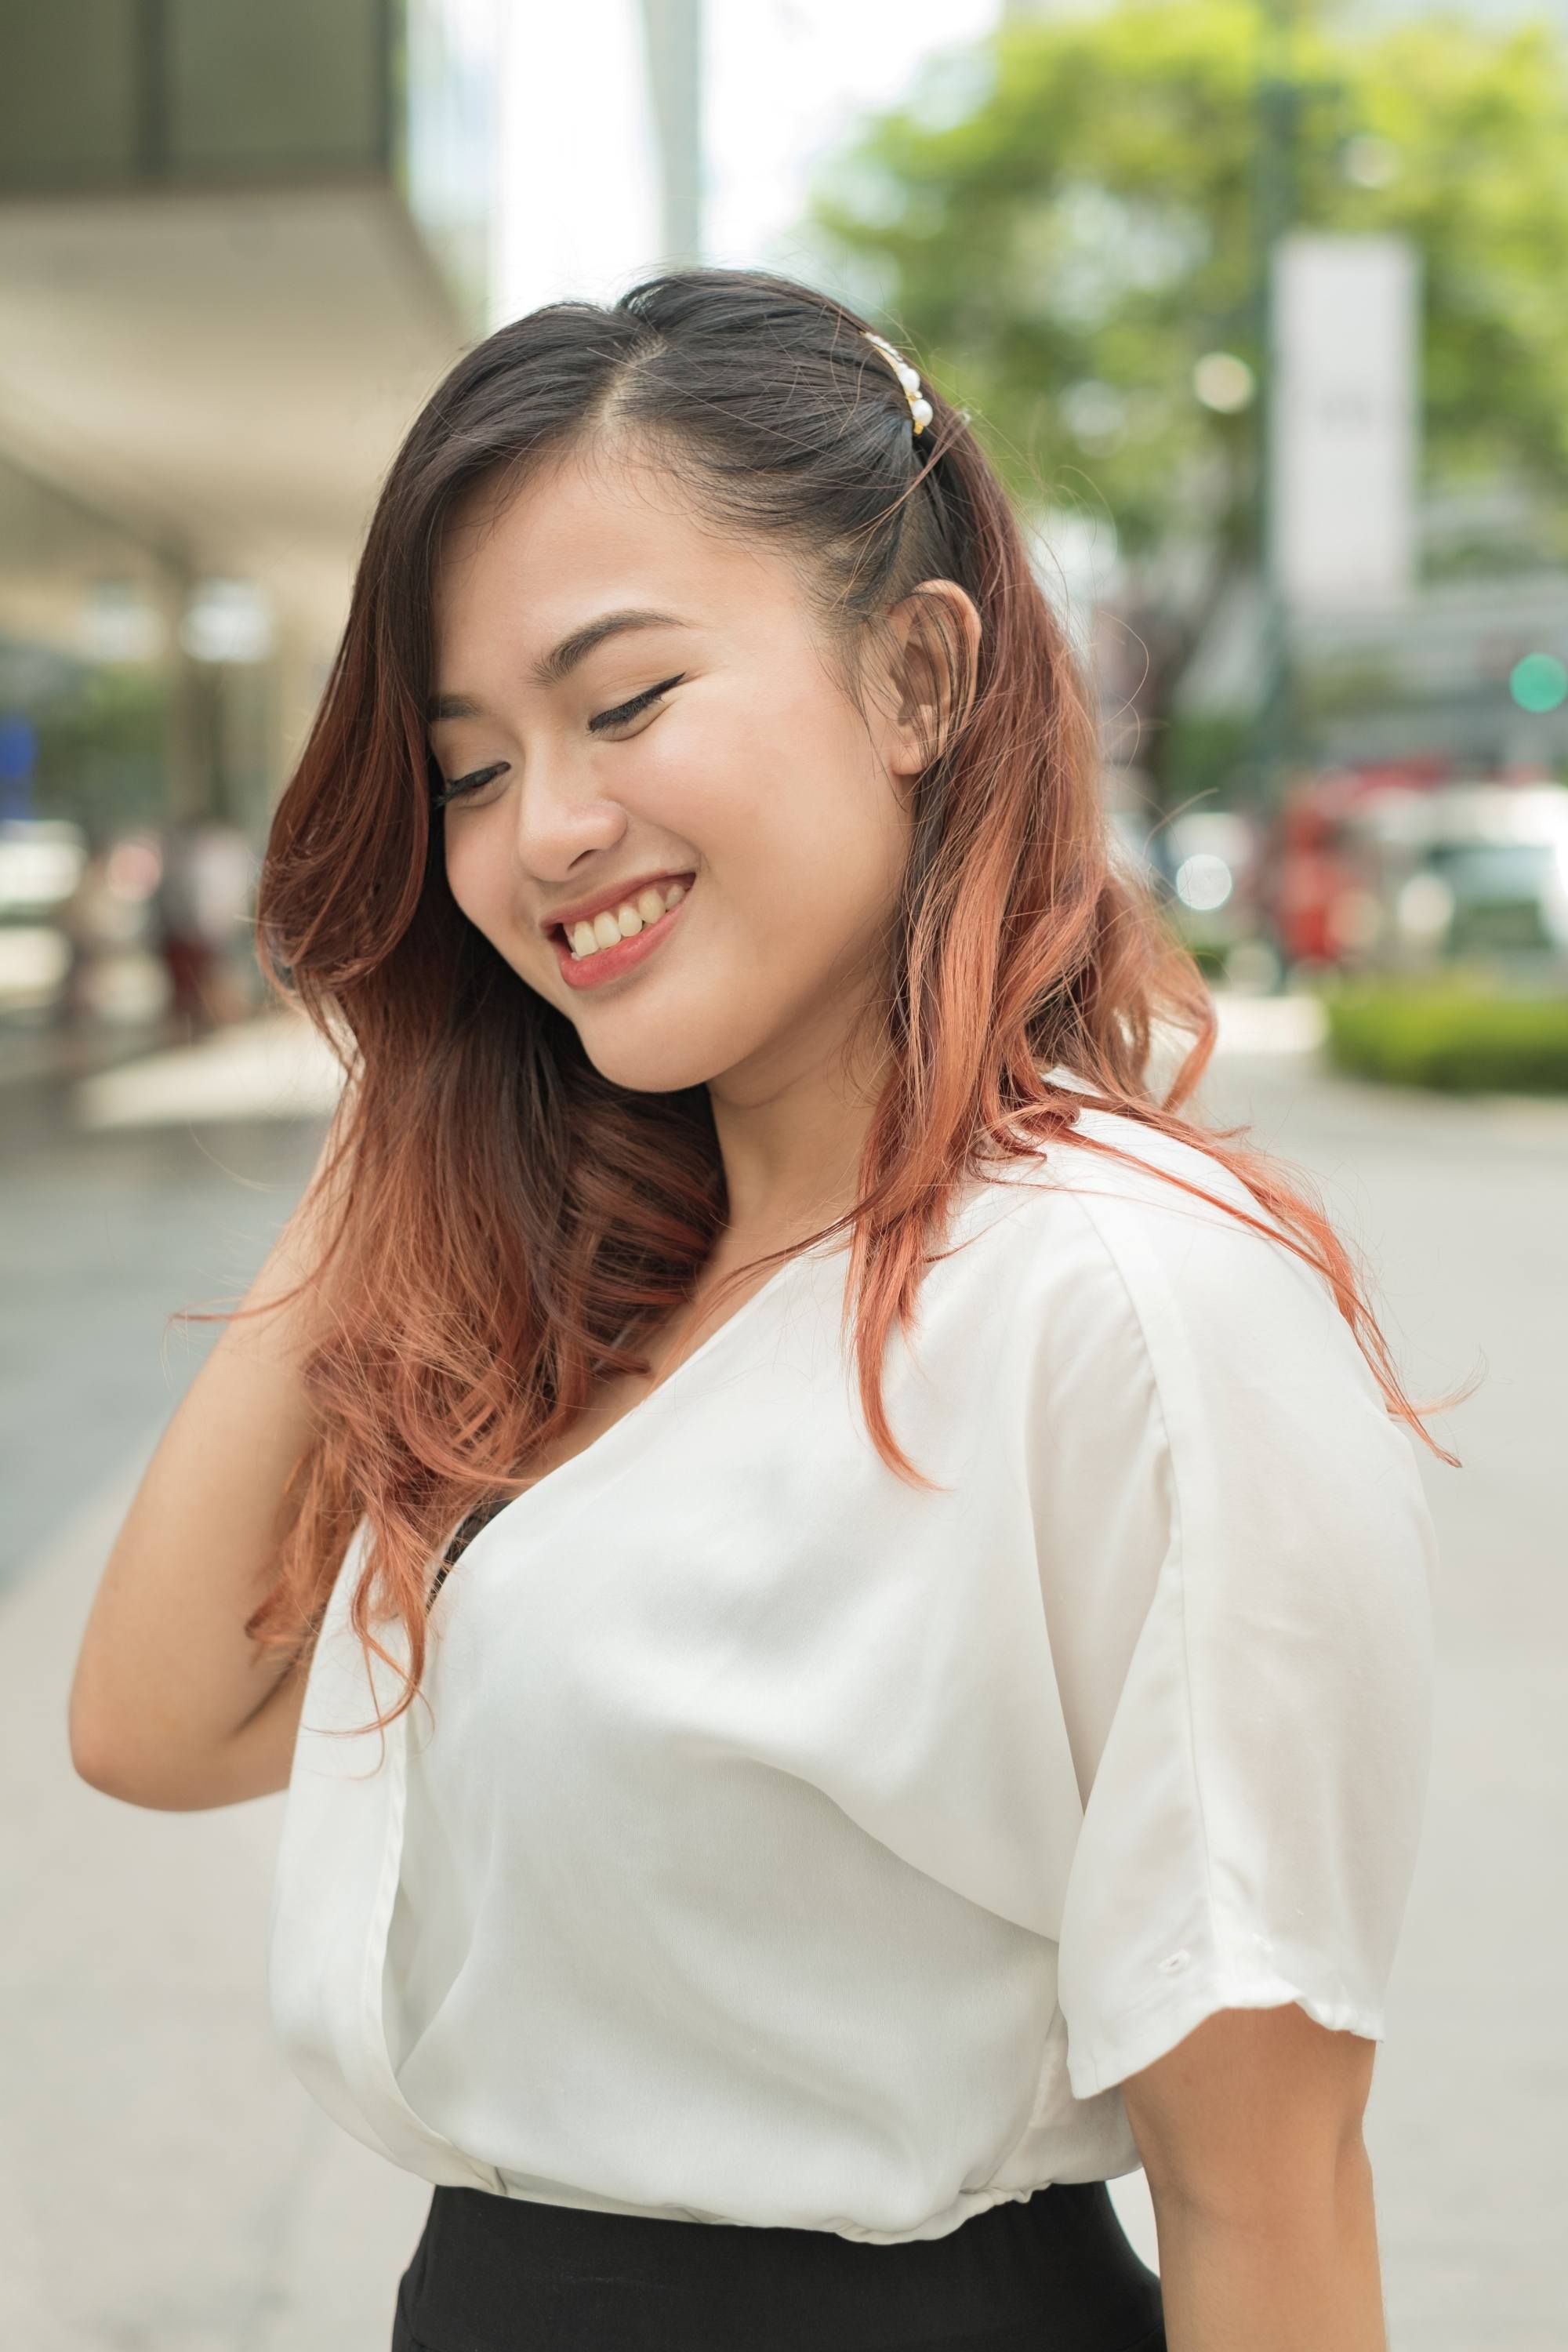 Christmas hairstyles: Filipina woman with long brown hair with clip wearing a white blouse outdoors